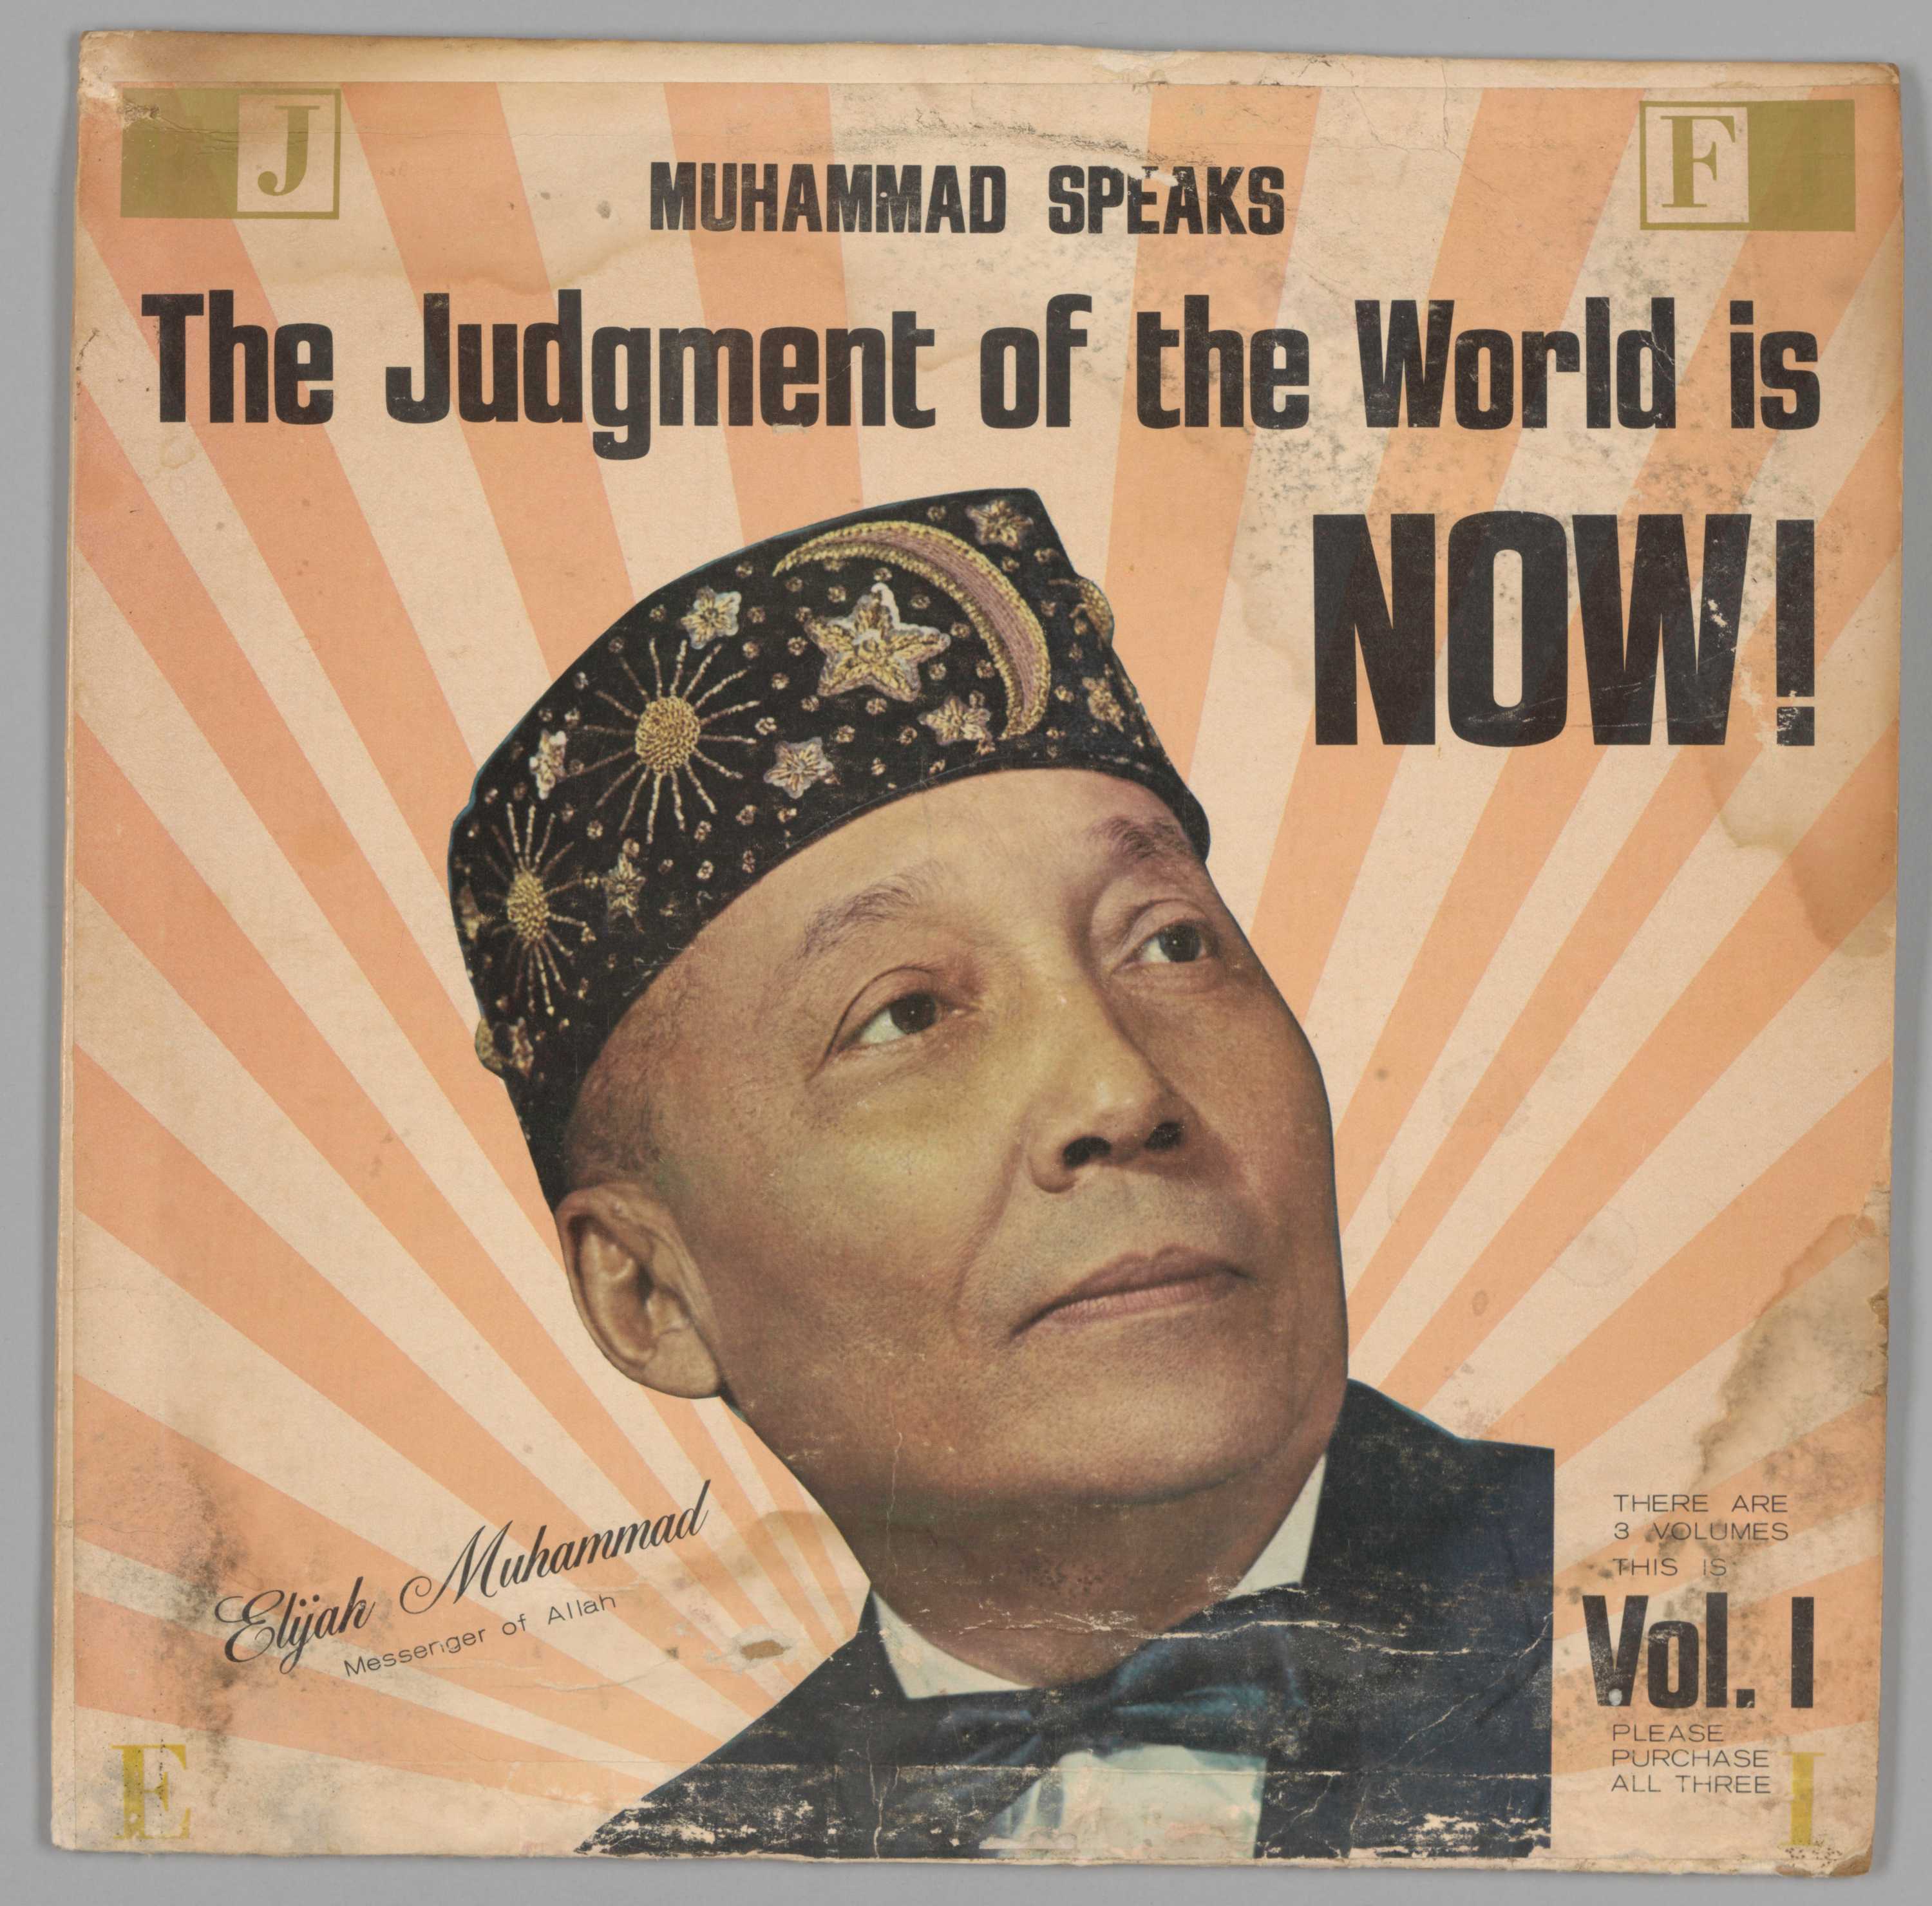 This cardboard record sleeve features a portrait of Elijah Muhammad at the center of the front cover. Muhammad wears a fez decorated with the Islamic star and crescent symbol and he also wears a black bow tie. Muhammad looks off camera to the right, his eyes on something in the distance. There are four lines of large black text across the top of the cover which read [MUHAMMAD SPEAKS/The Judgment of the World is/NOW!]. To the bottom left of Muhammad's portrait is a line of diagonal black script which reads [Elijah Muhammad/Messenger of Allah]. To the bottom right of his portrait there is a block of black text which reads [THERE ARE/3 VOLUMES/THIS IS/VOL. 1/PLEASE/PURCHASE/ALL THREE]. This cardboard sleeve is water damaged and tearing along one of its sides.